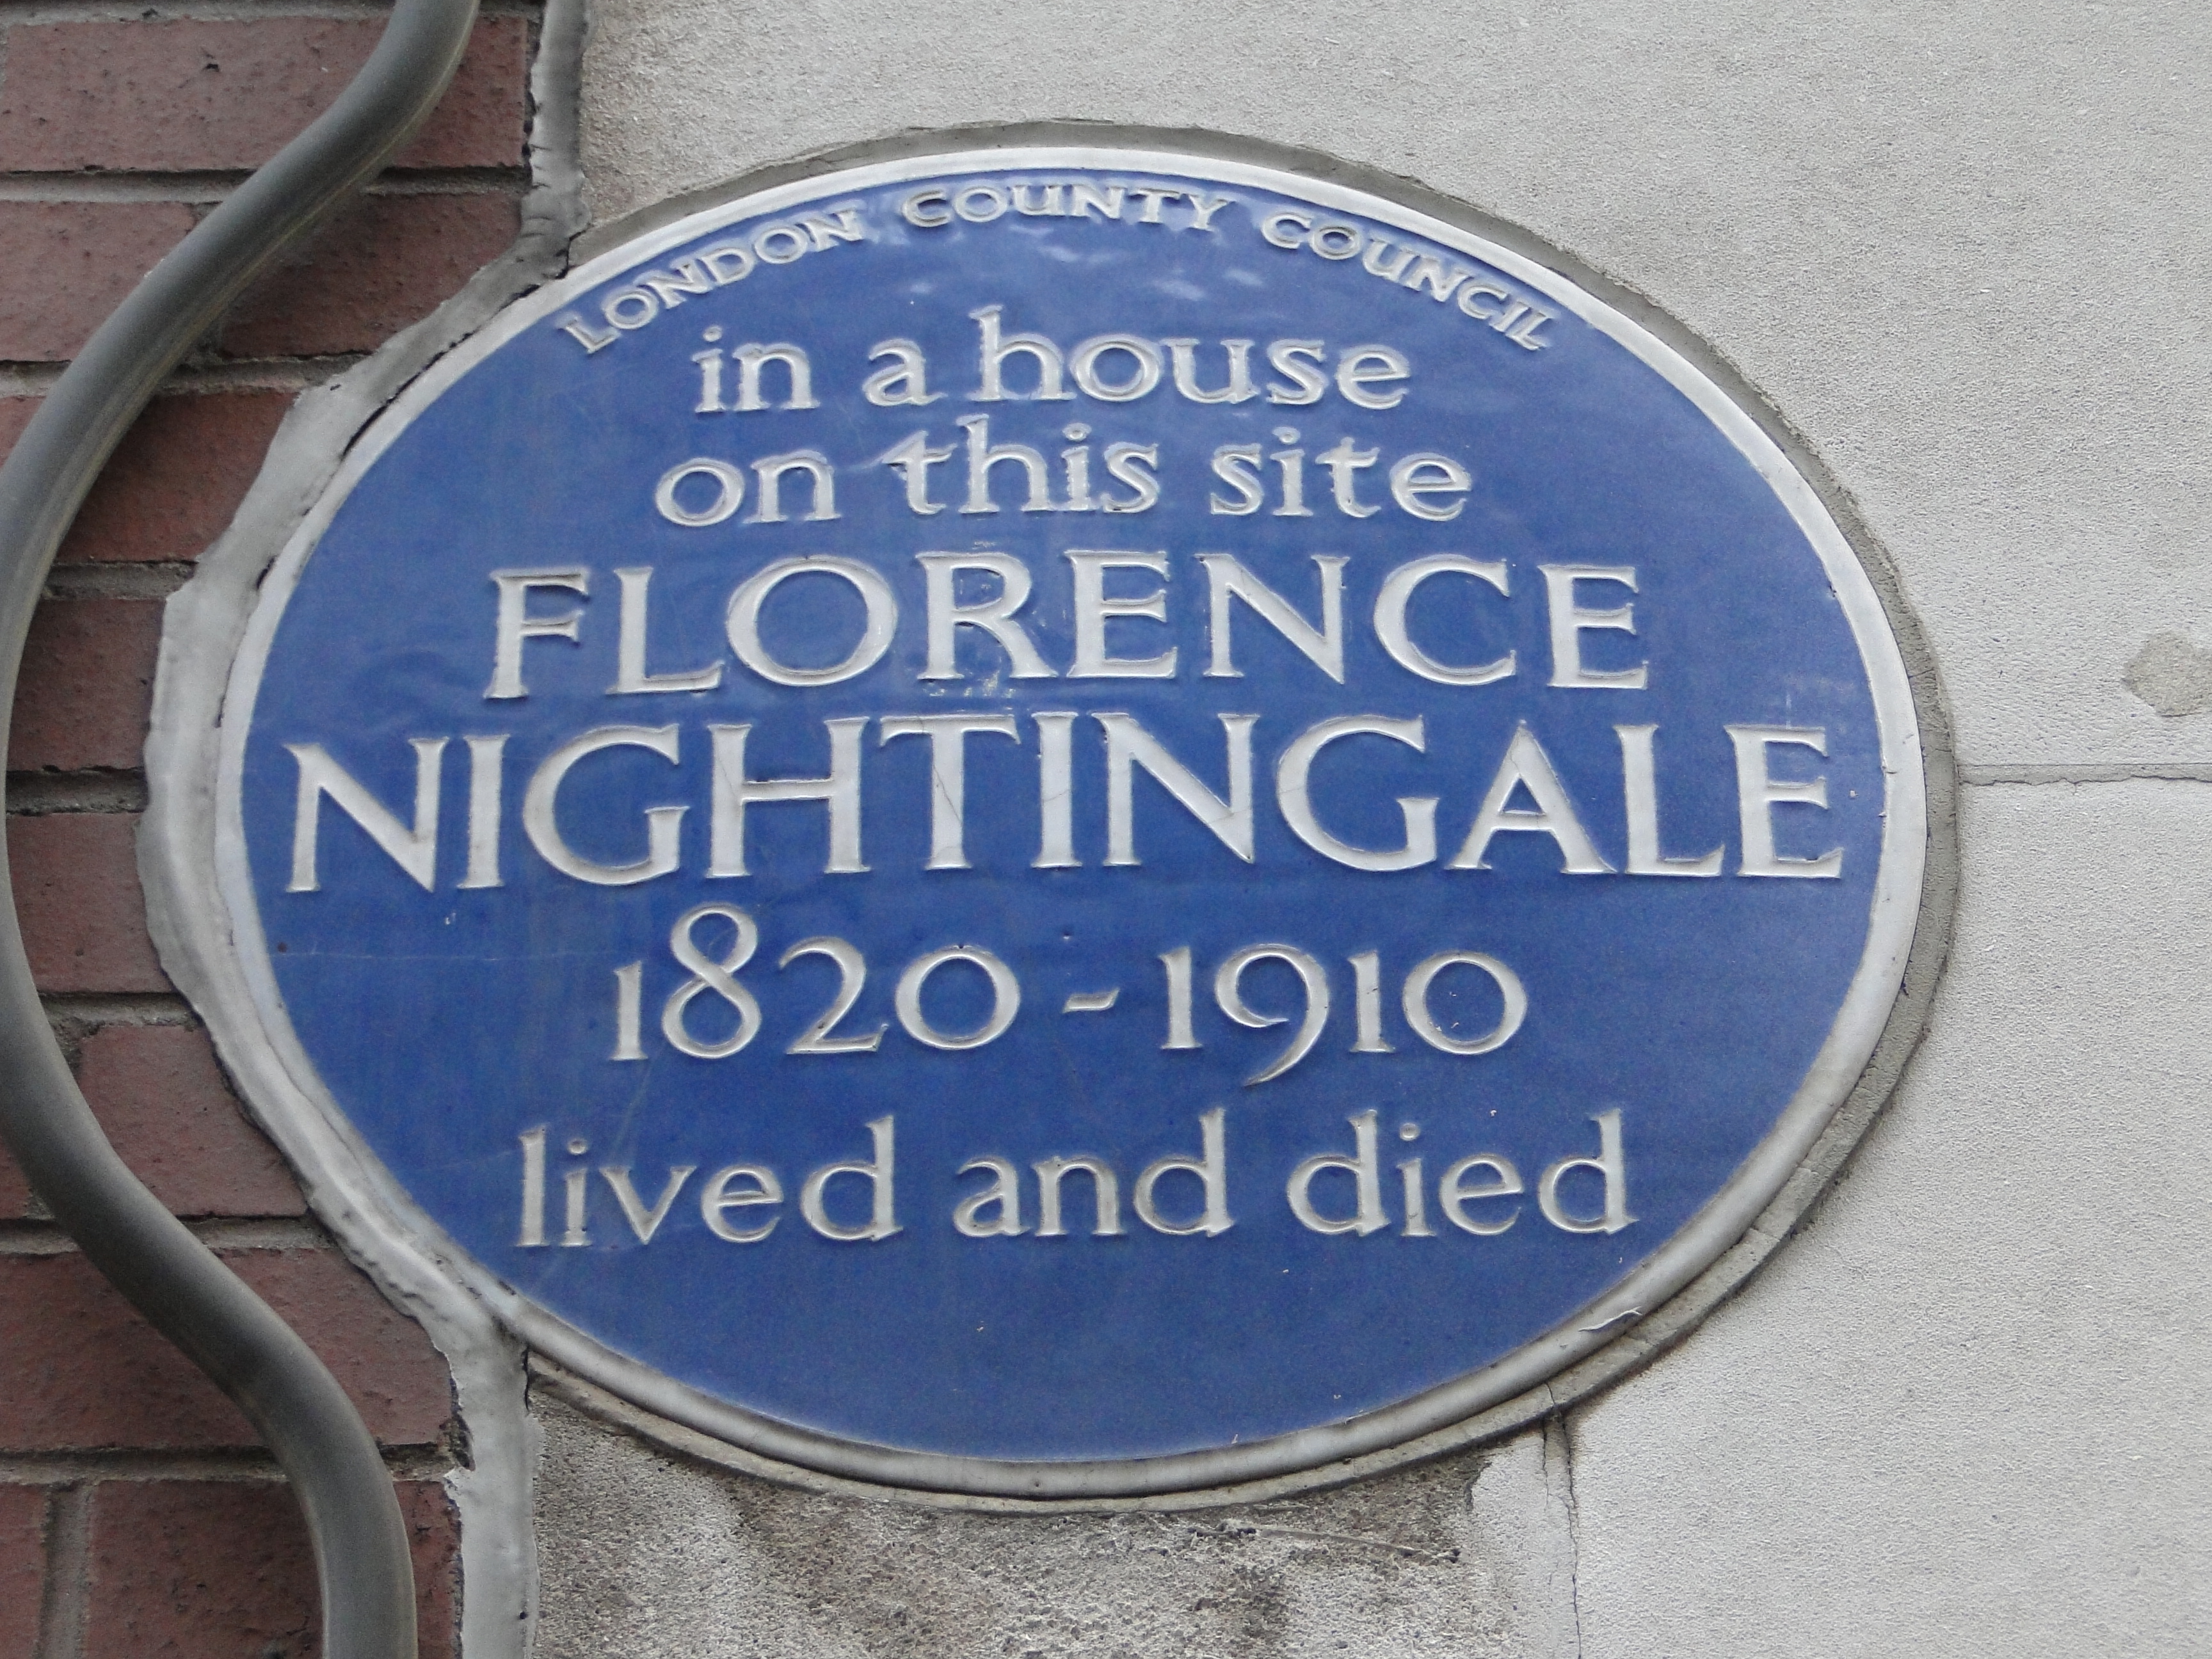 Blue plaque to Florence Nightingale in 8 South St, Mayfair, London. Photo taken on October 26, 2012.